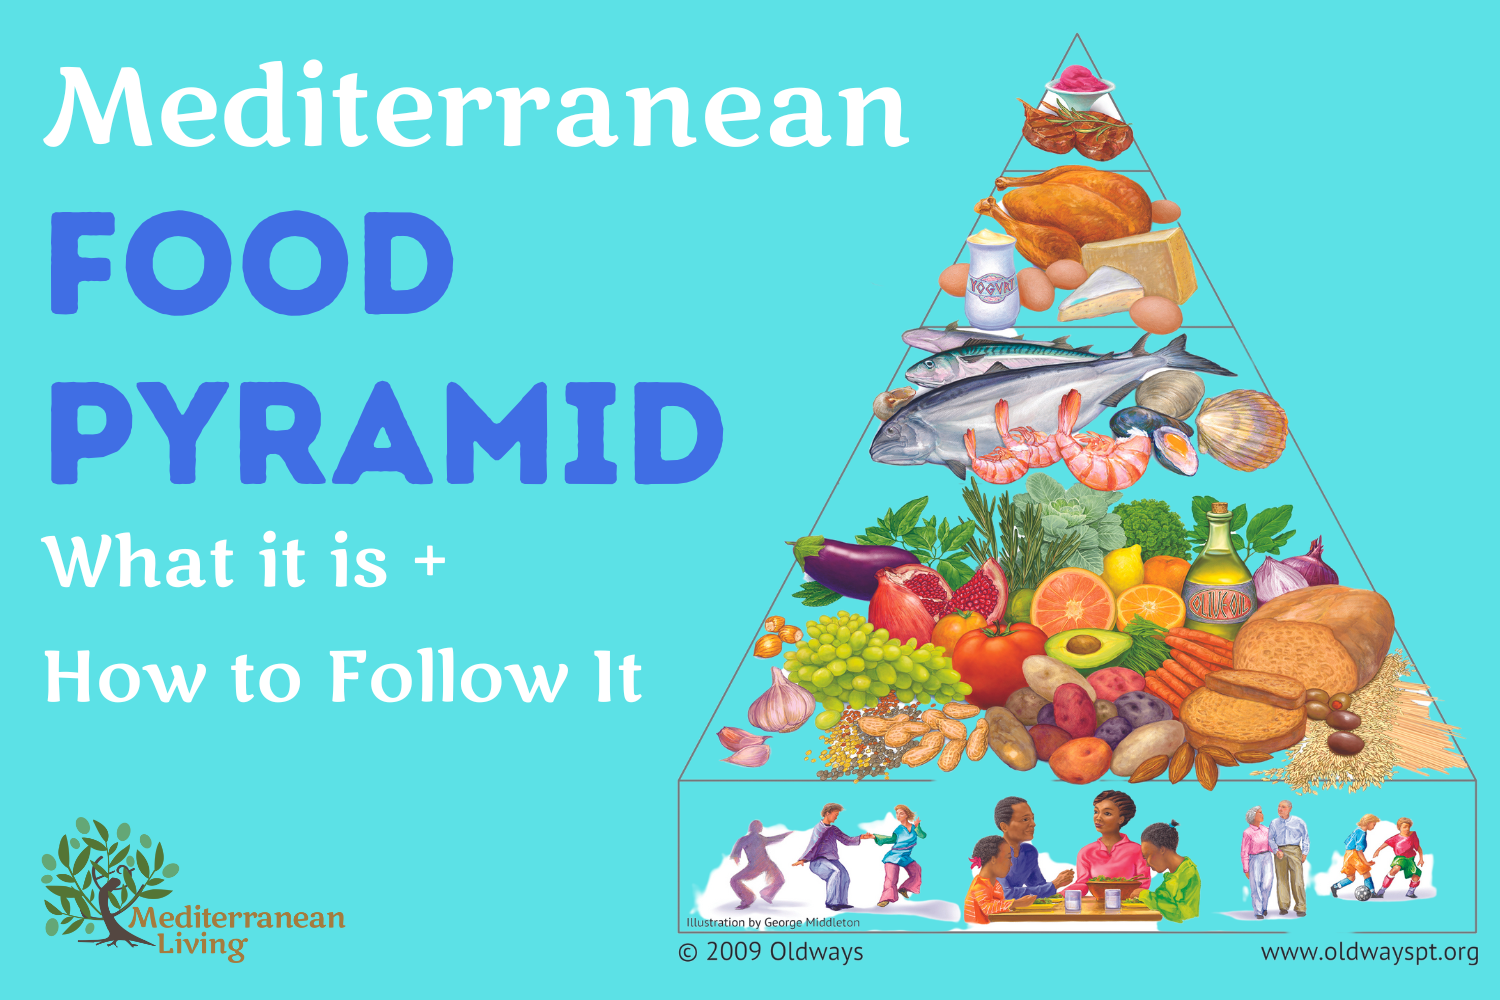 Mediterranean diet and culinary traditions